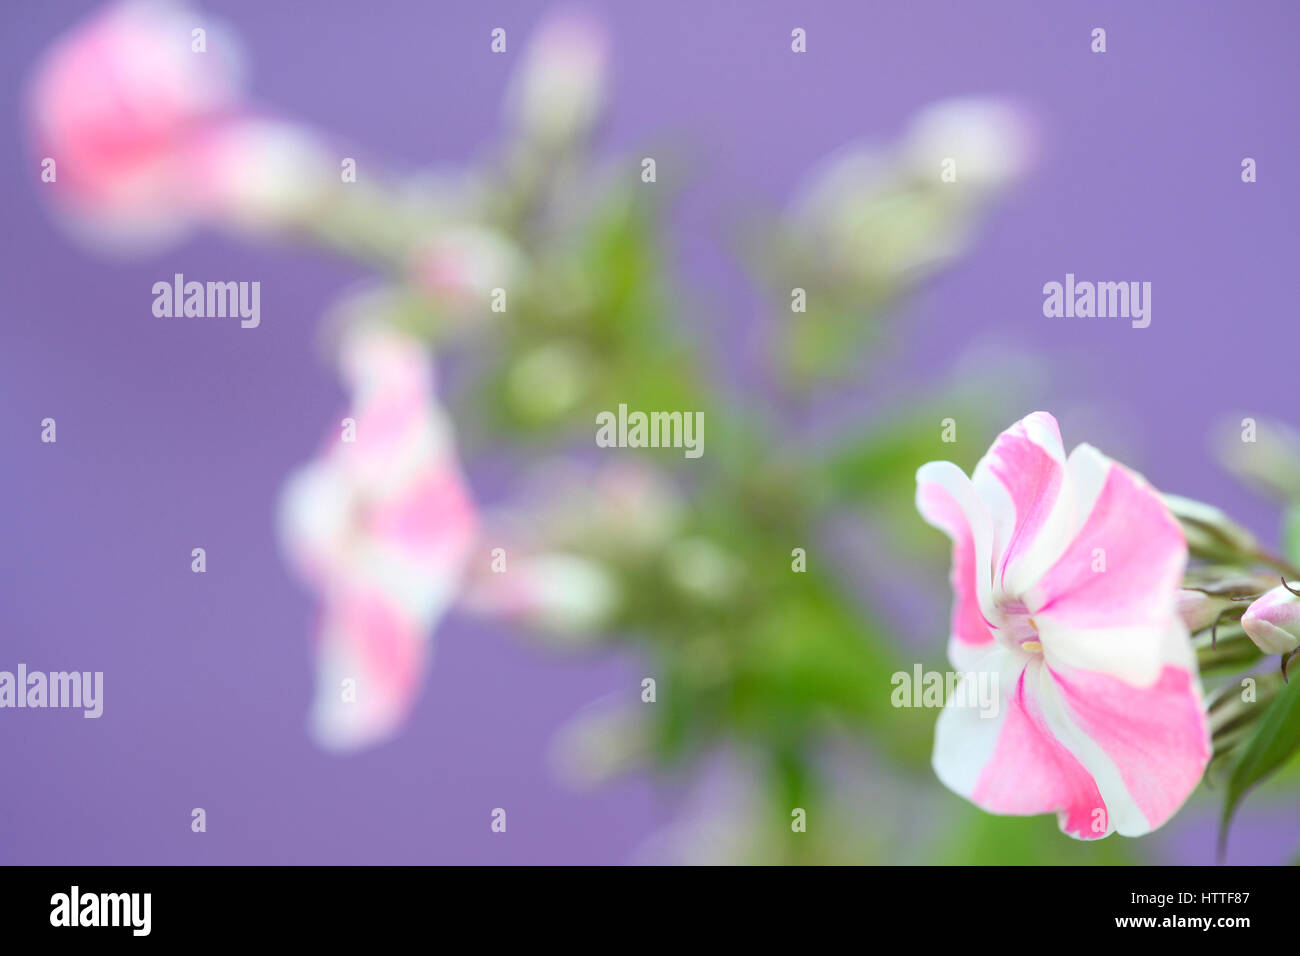 pink and white candy-striped phlox flower still life Jane Ann Butler Photography JABP1885 Stock Photo